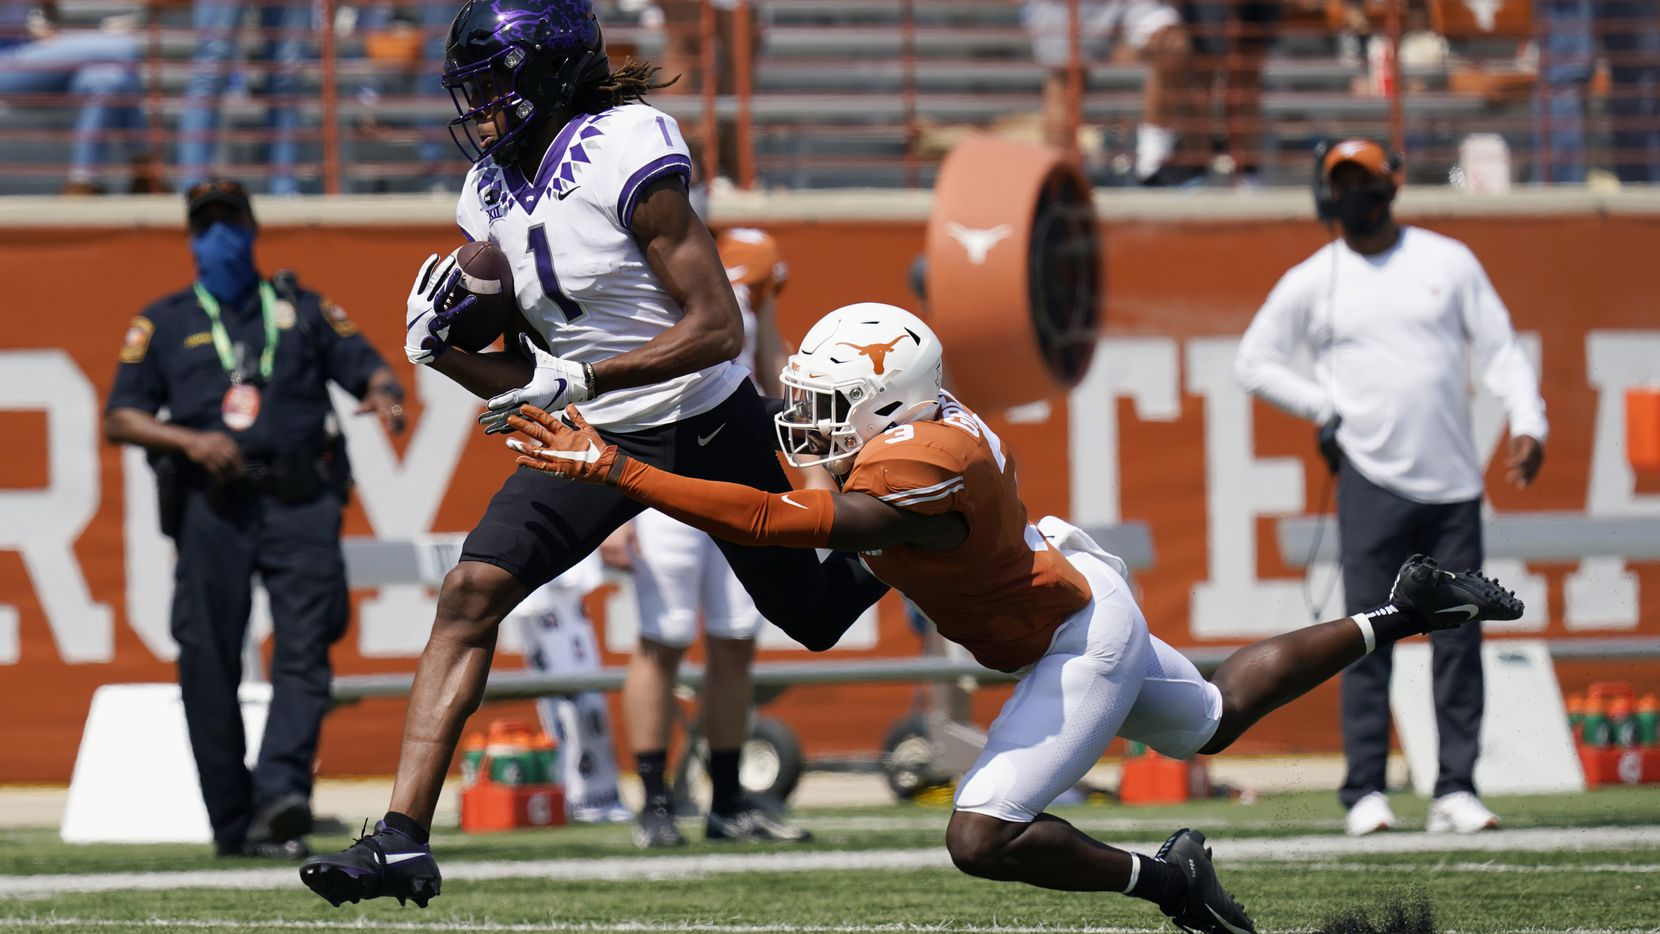 TCU wide receiver Quentin Johnston (1) reaches for a pass over Texas defensive back Jalen Green (3) during the first half of an NCAA college football game, Saturday, Oct. 3, 2020, in Austin, Texas. Johnston was tripped up on the play and dropped the ball.